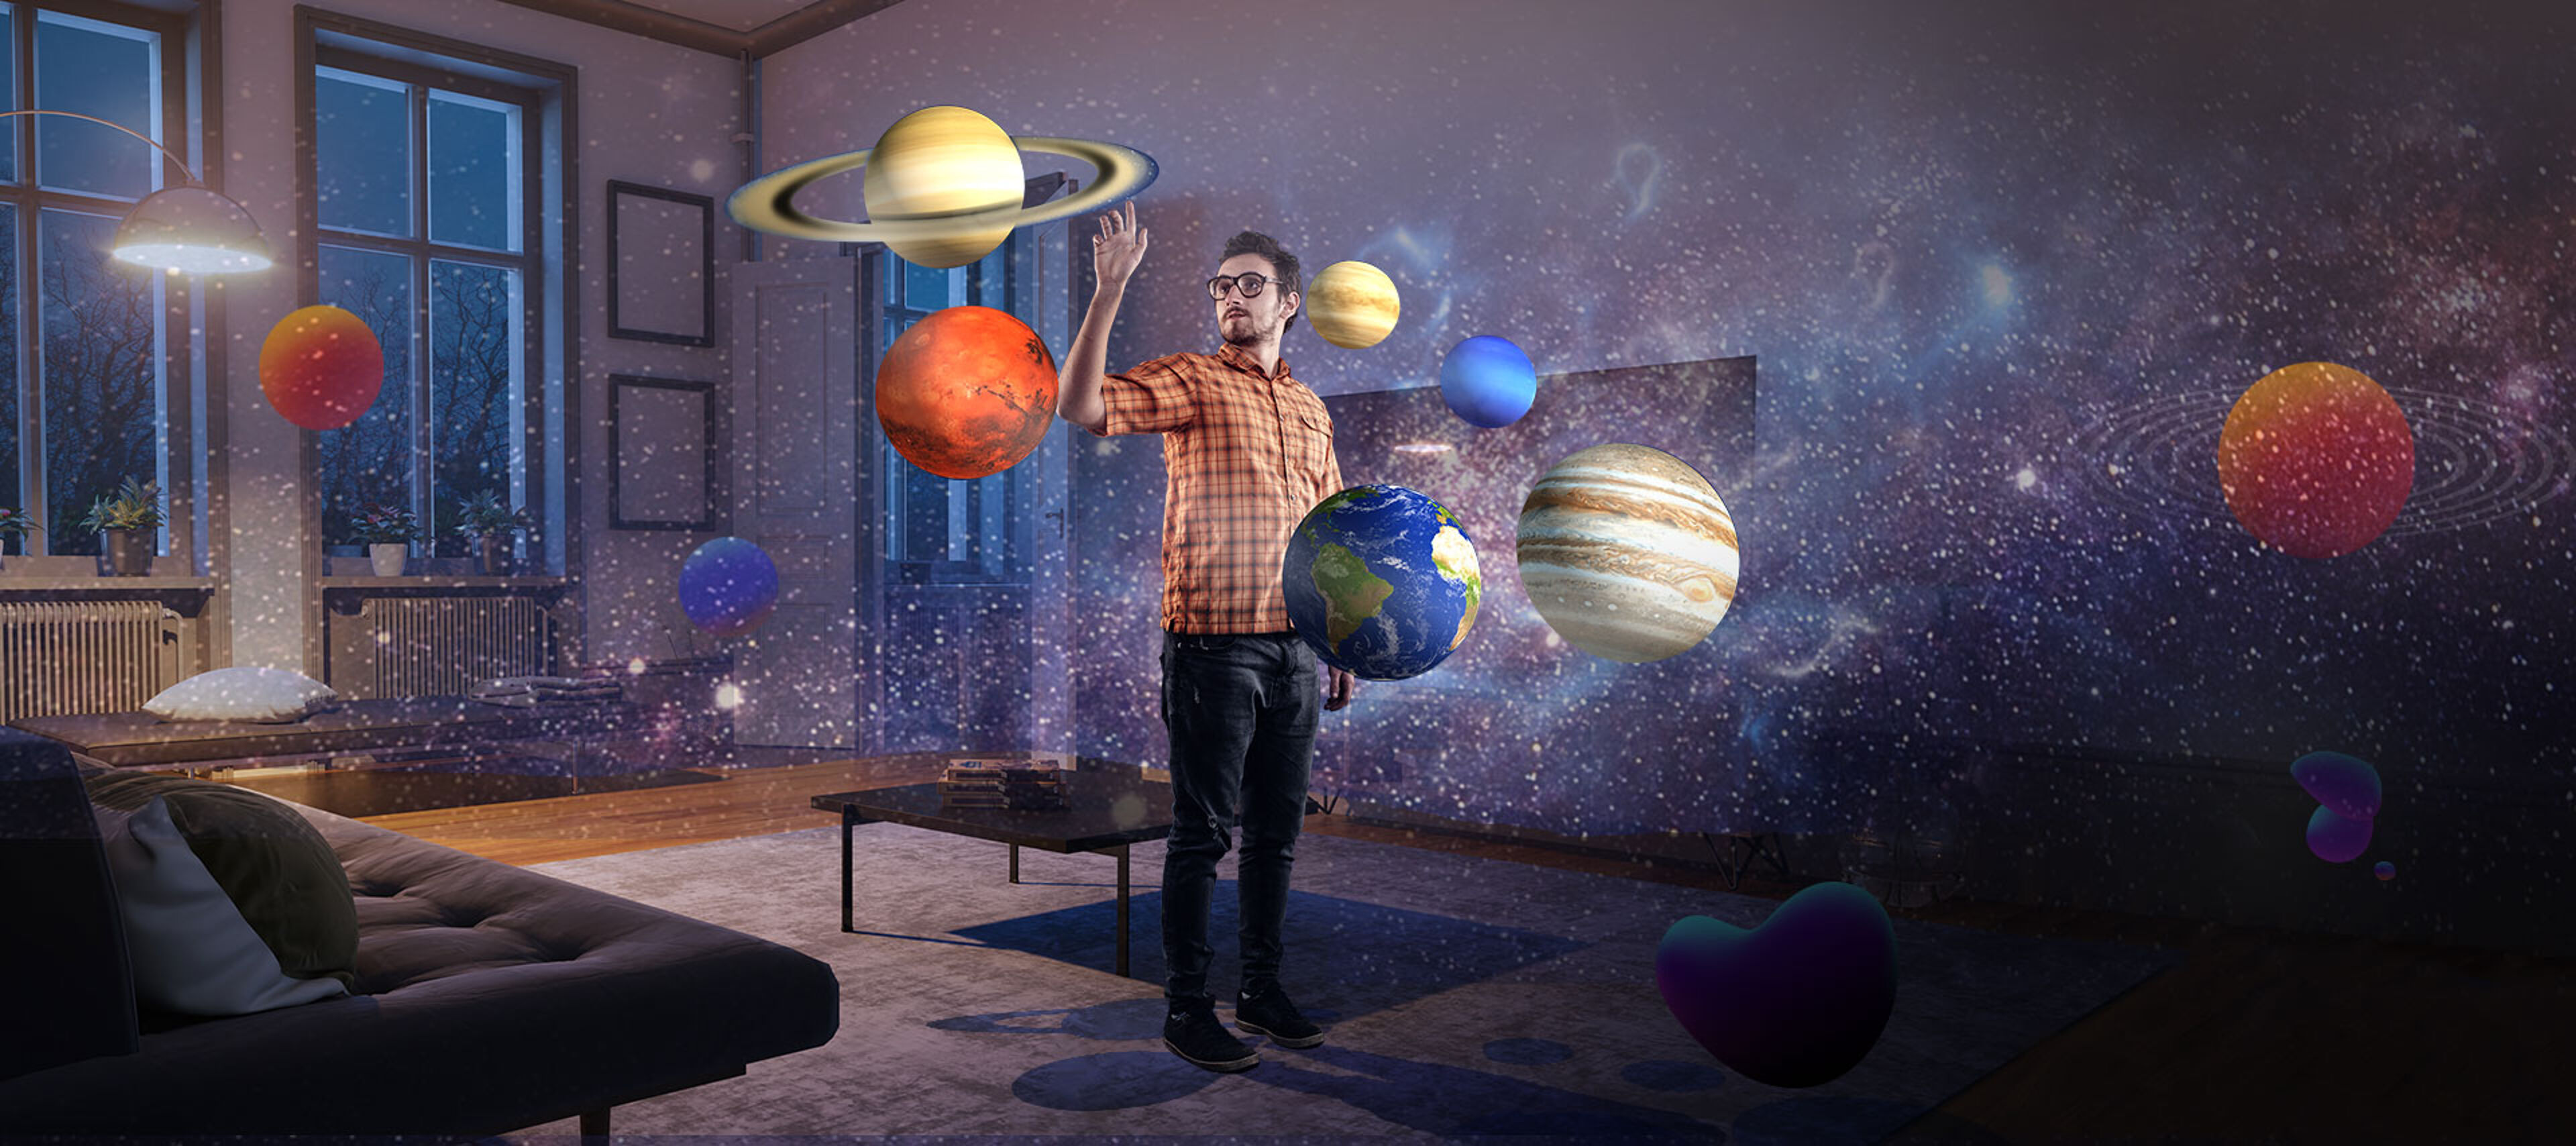 A man in a plaid shirt interacts with a 3D solar system in an augmented reality setting, surrounded by a cosmic backdrop inside a room.